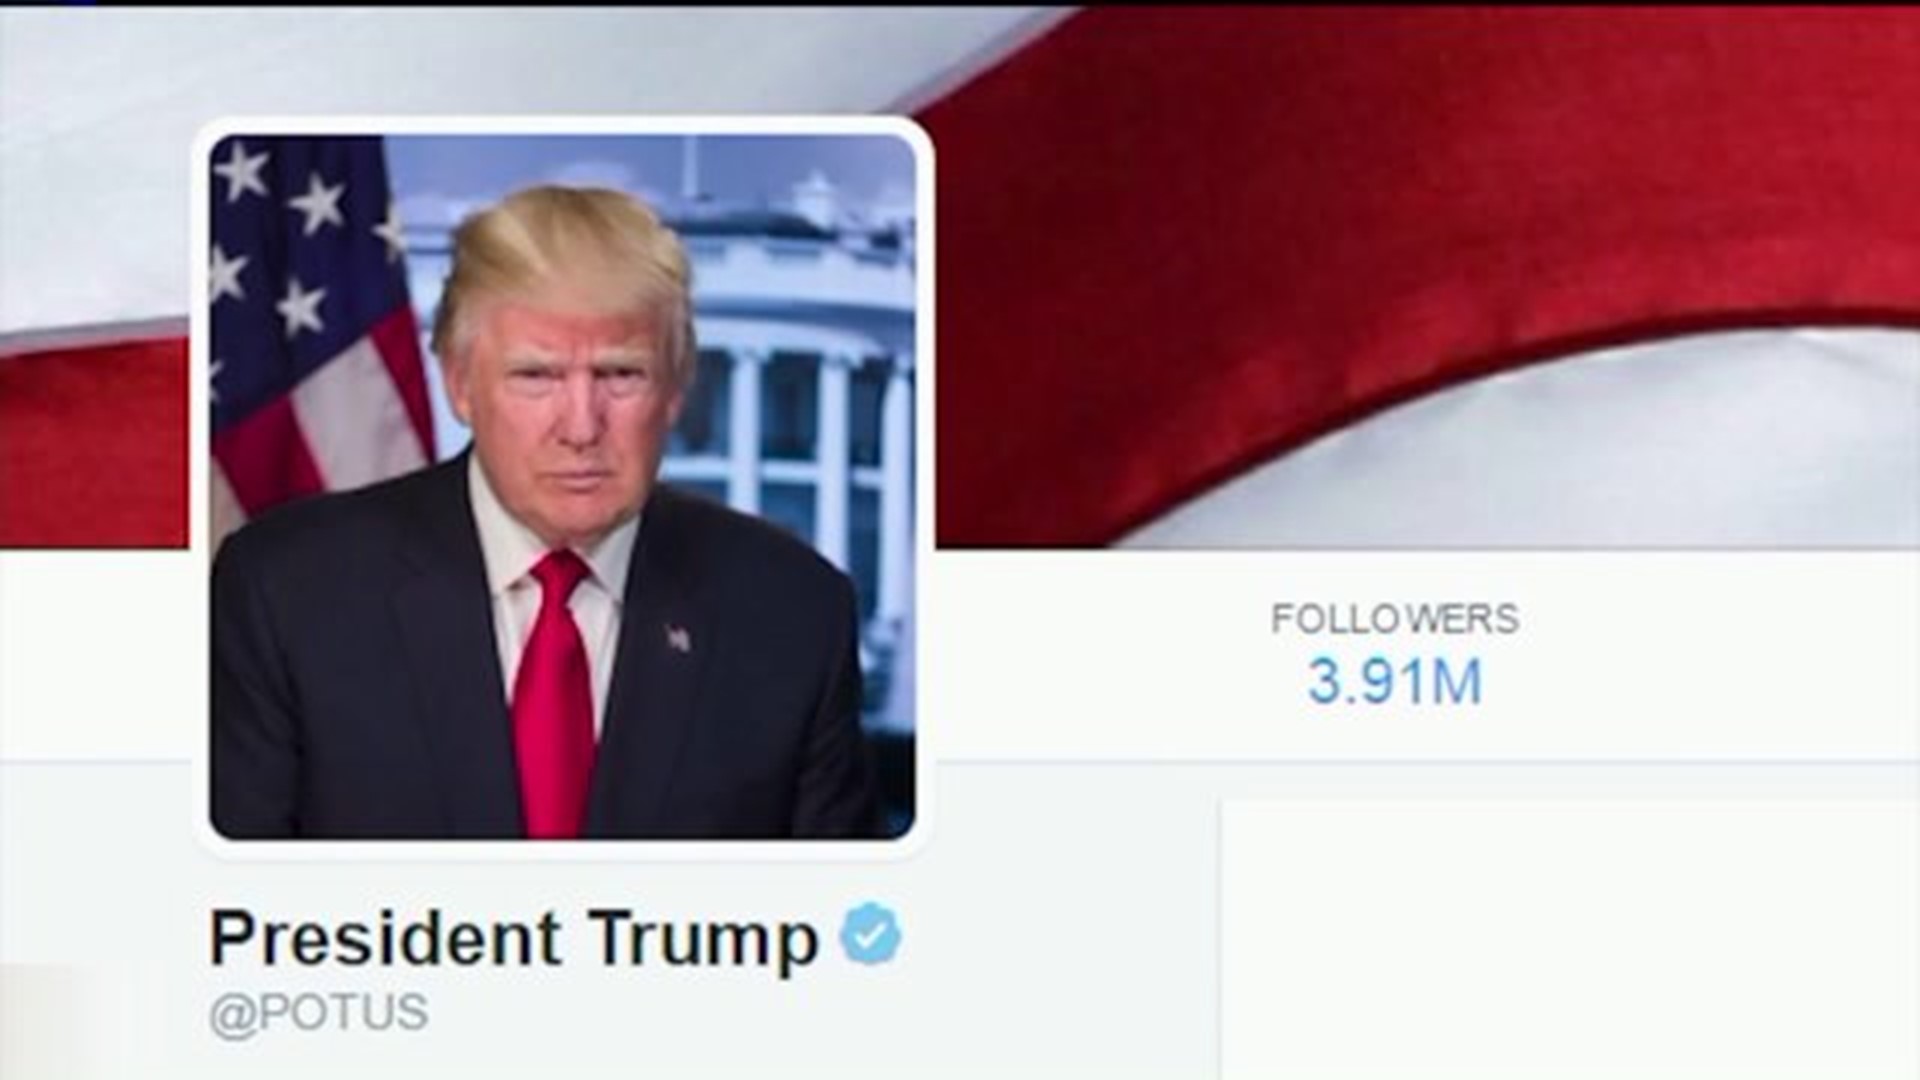 Approval for Trump on Twitter in Schuylkill County